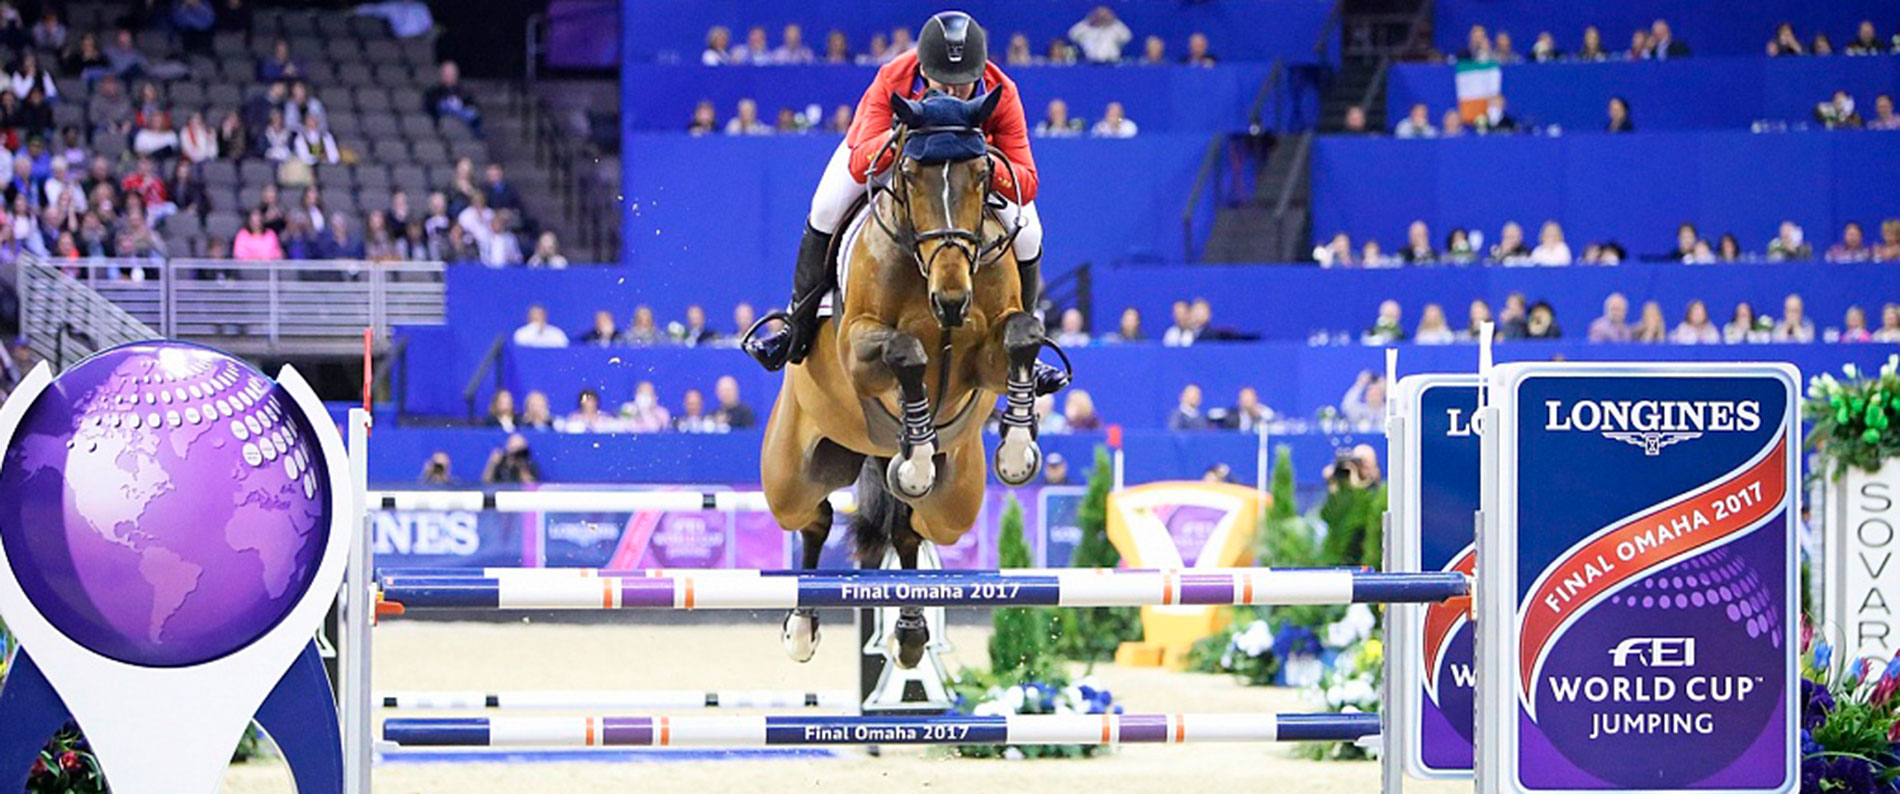 FEI World Cup 2017 Jumping